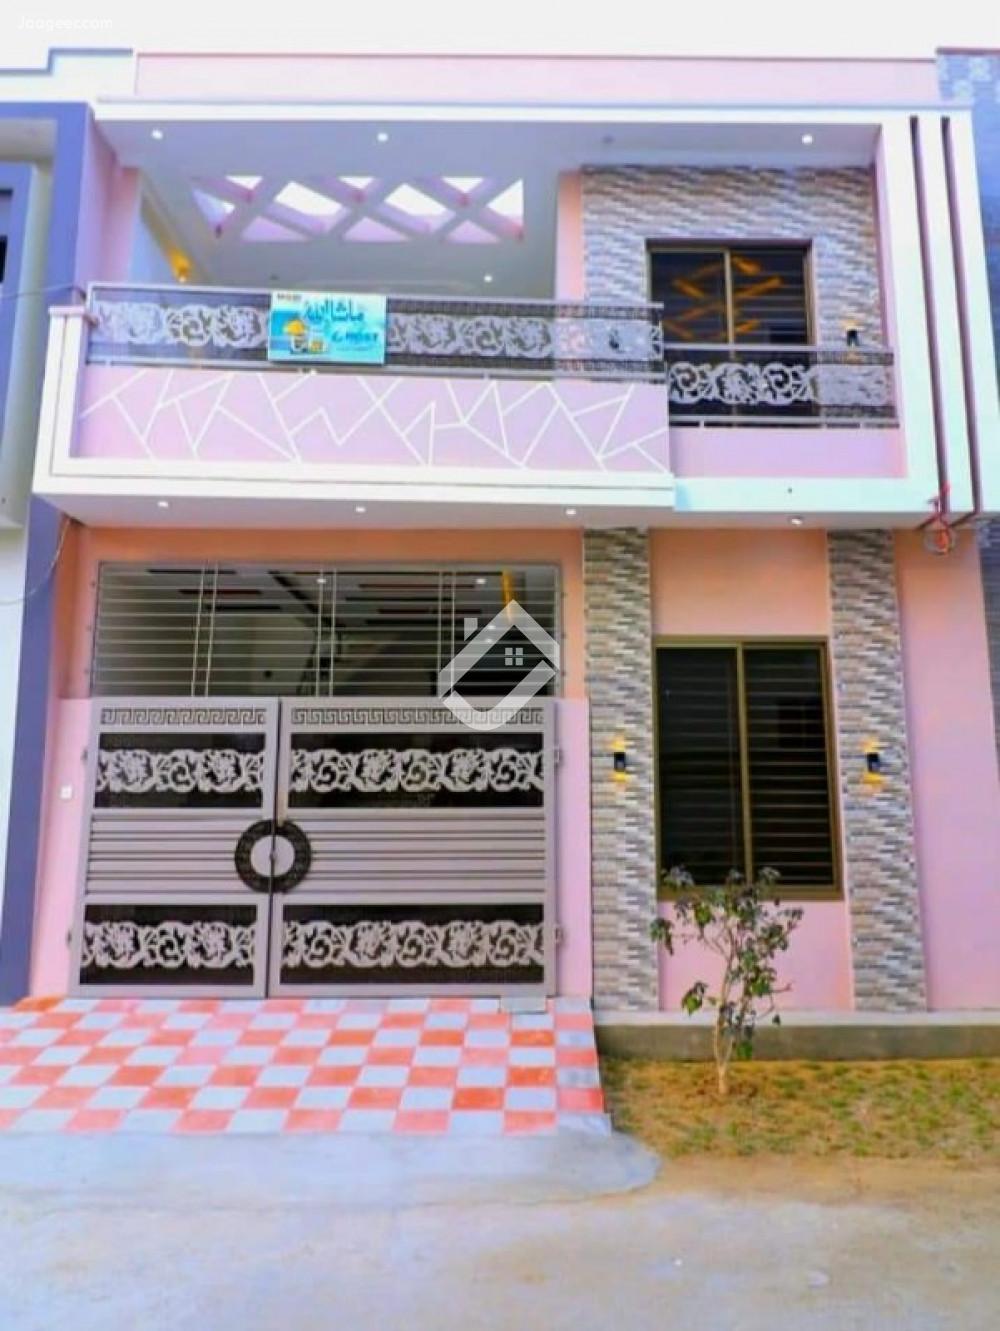 4.59 Marla Double Storey House For Sale In Green Orchard Housing City Garden Phase-II in Green Orchard Housing, Bahawalpur